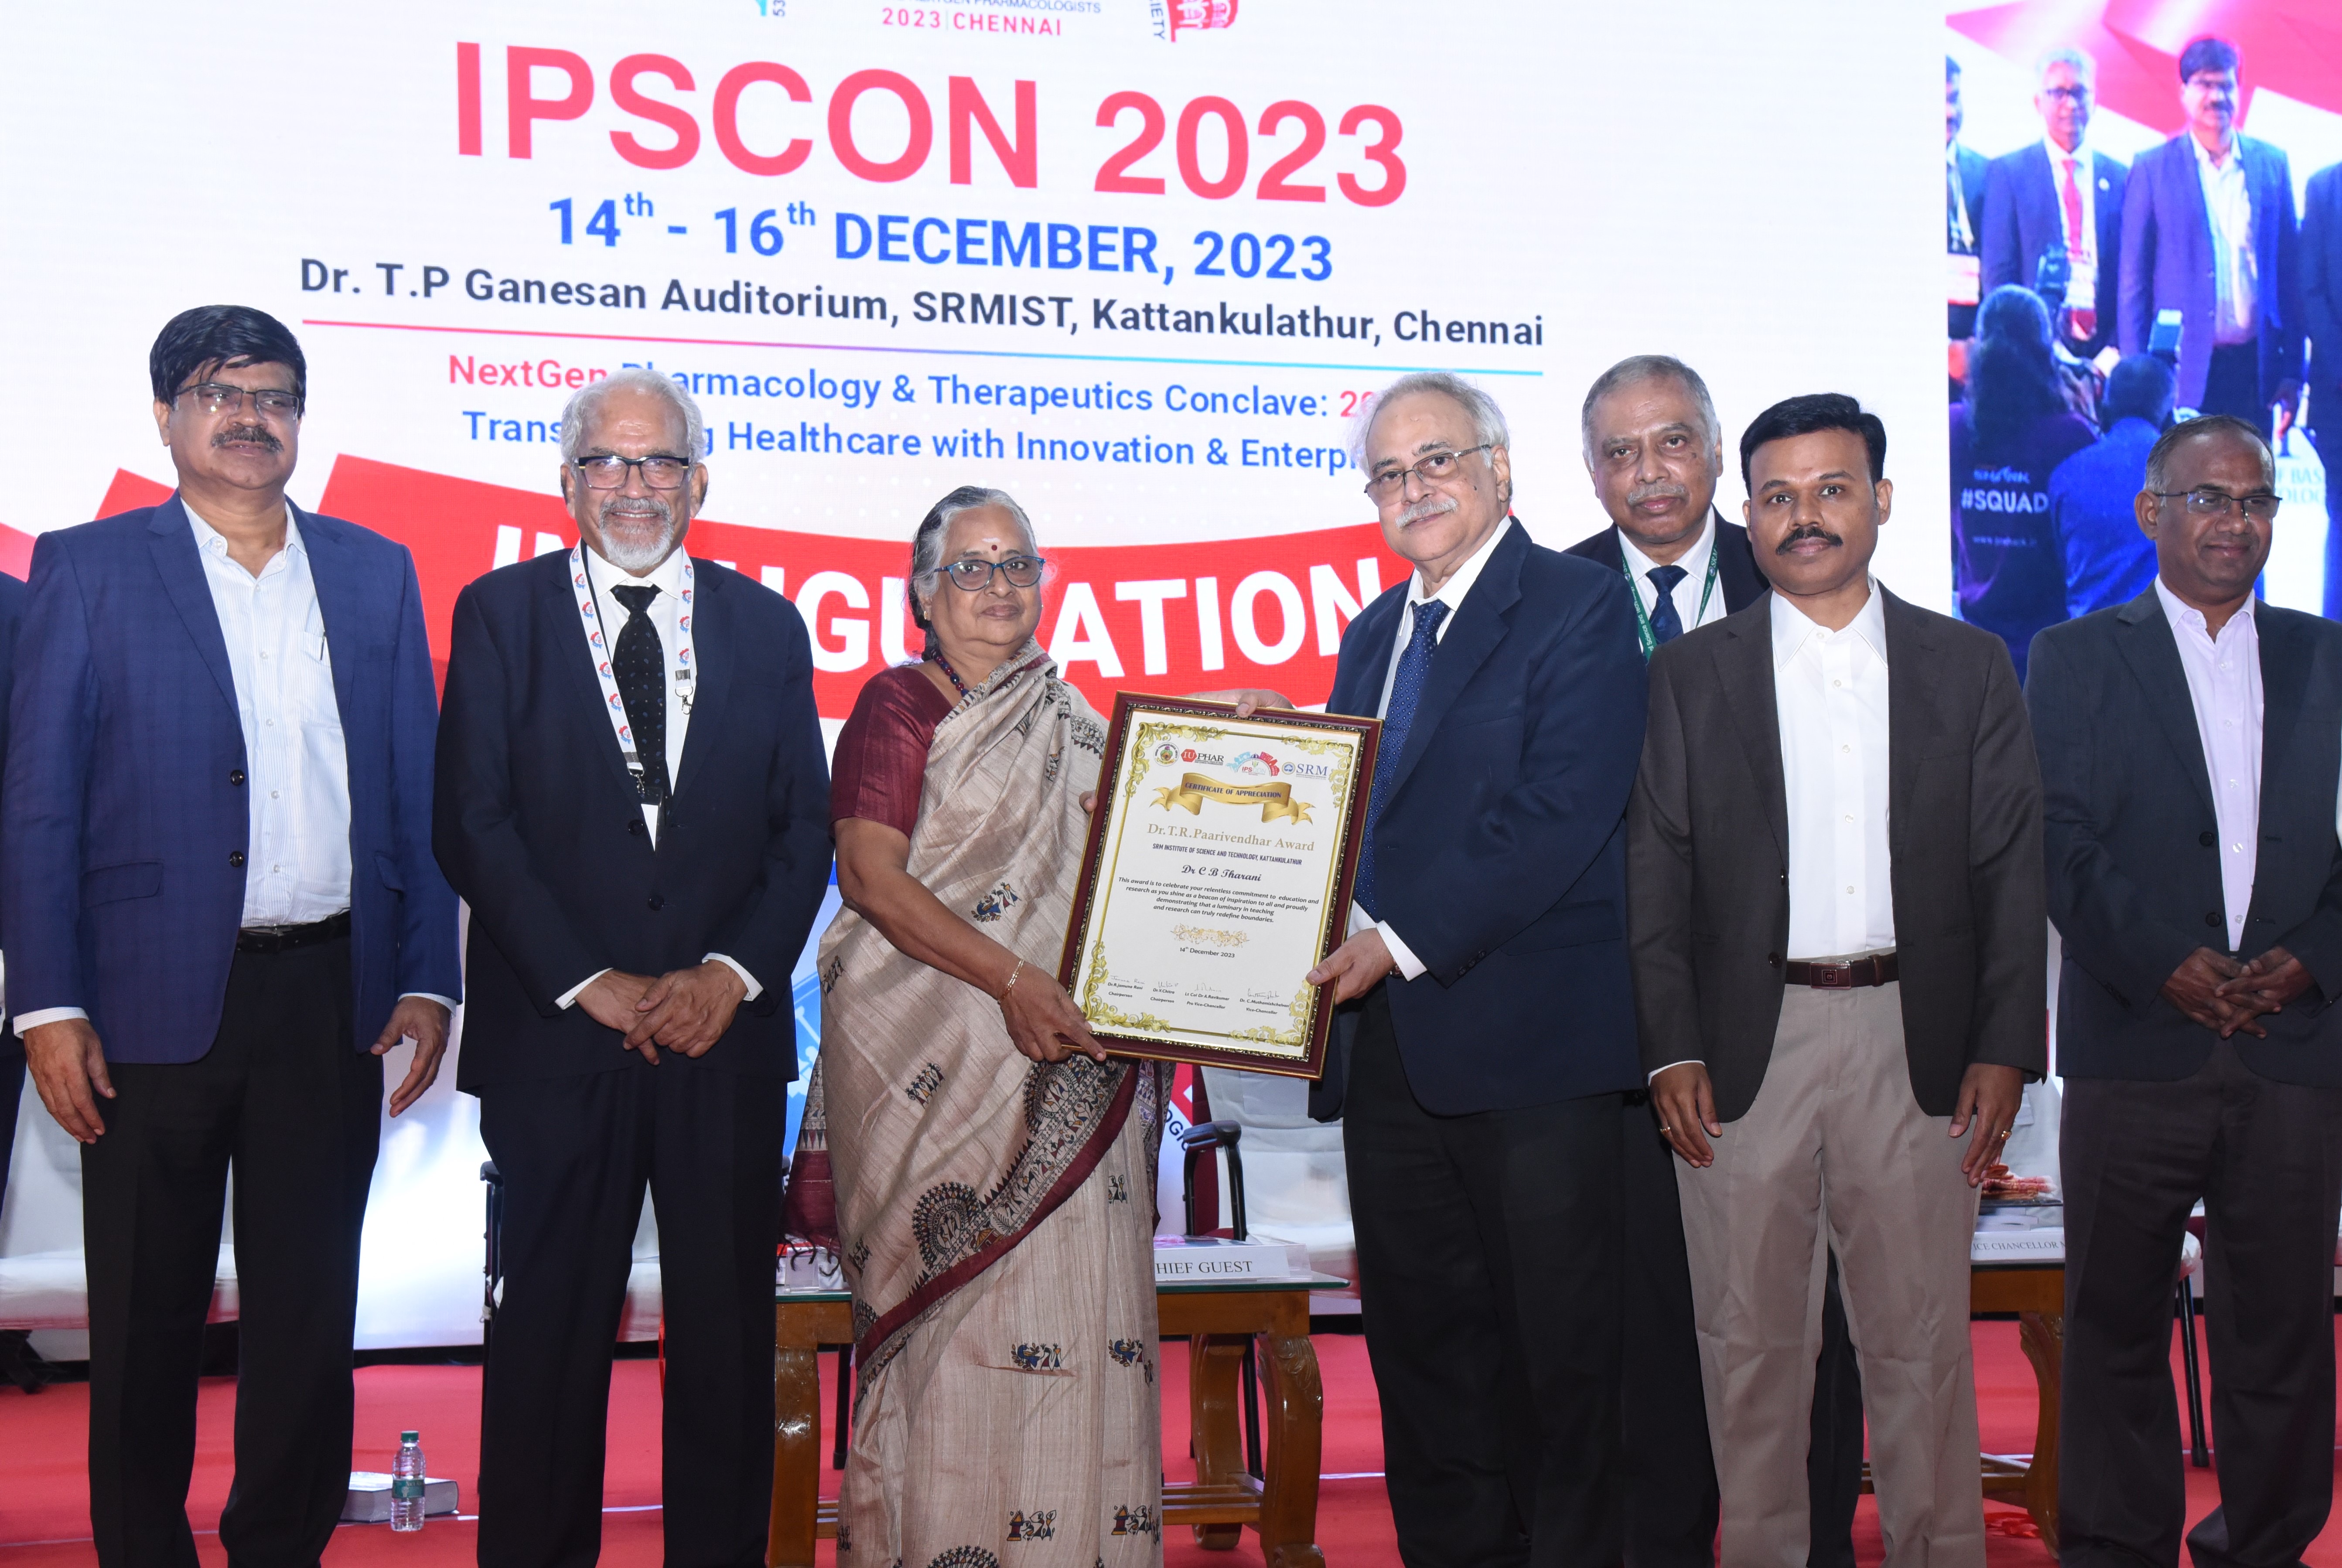 3-day, 53rd annual conf. of Indian Pharmacological Society begins at SRMIST